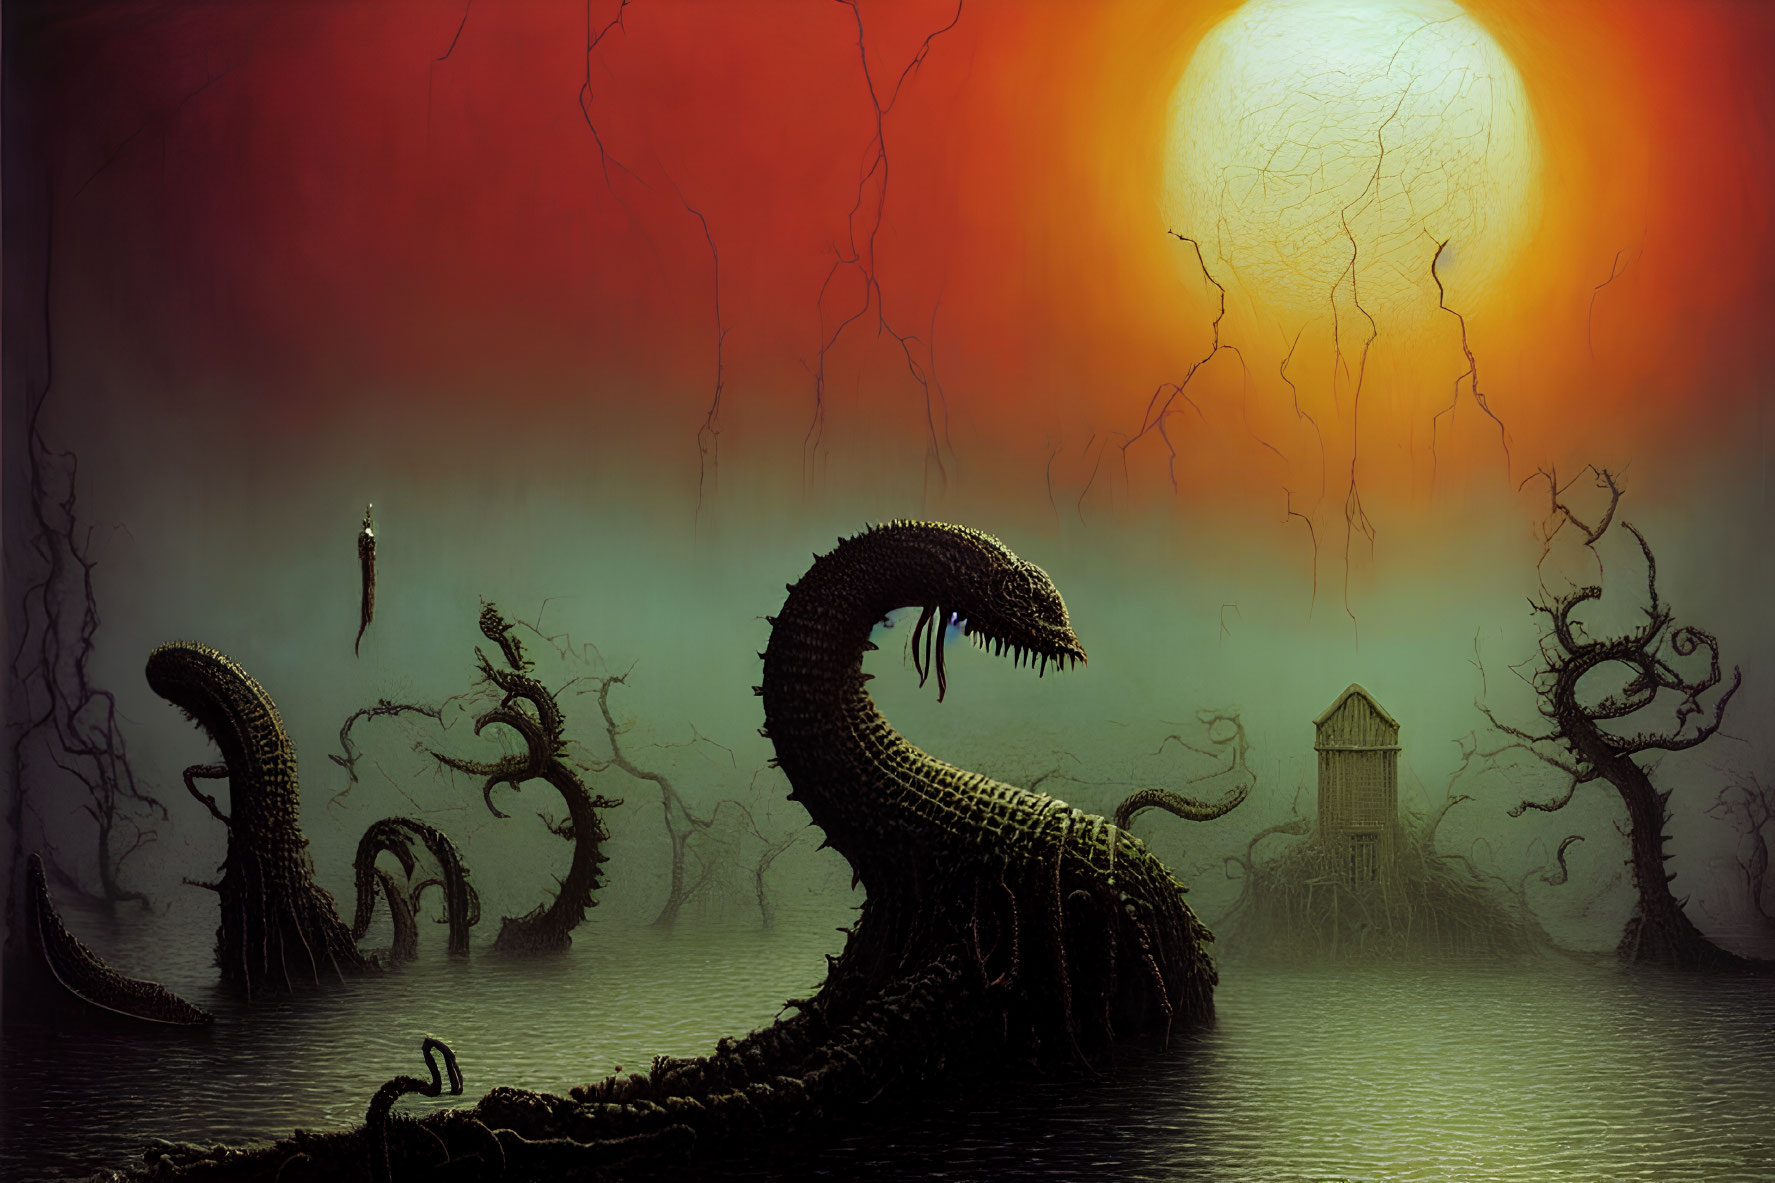 Fantastical landscape with red sun, eerie trees, tower, and serpentine creatures